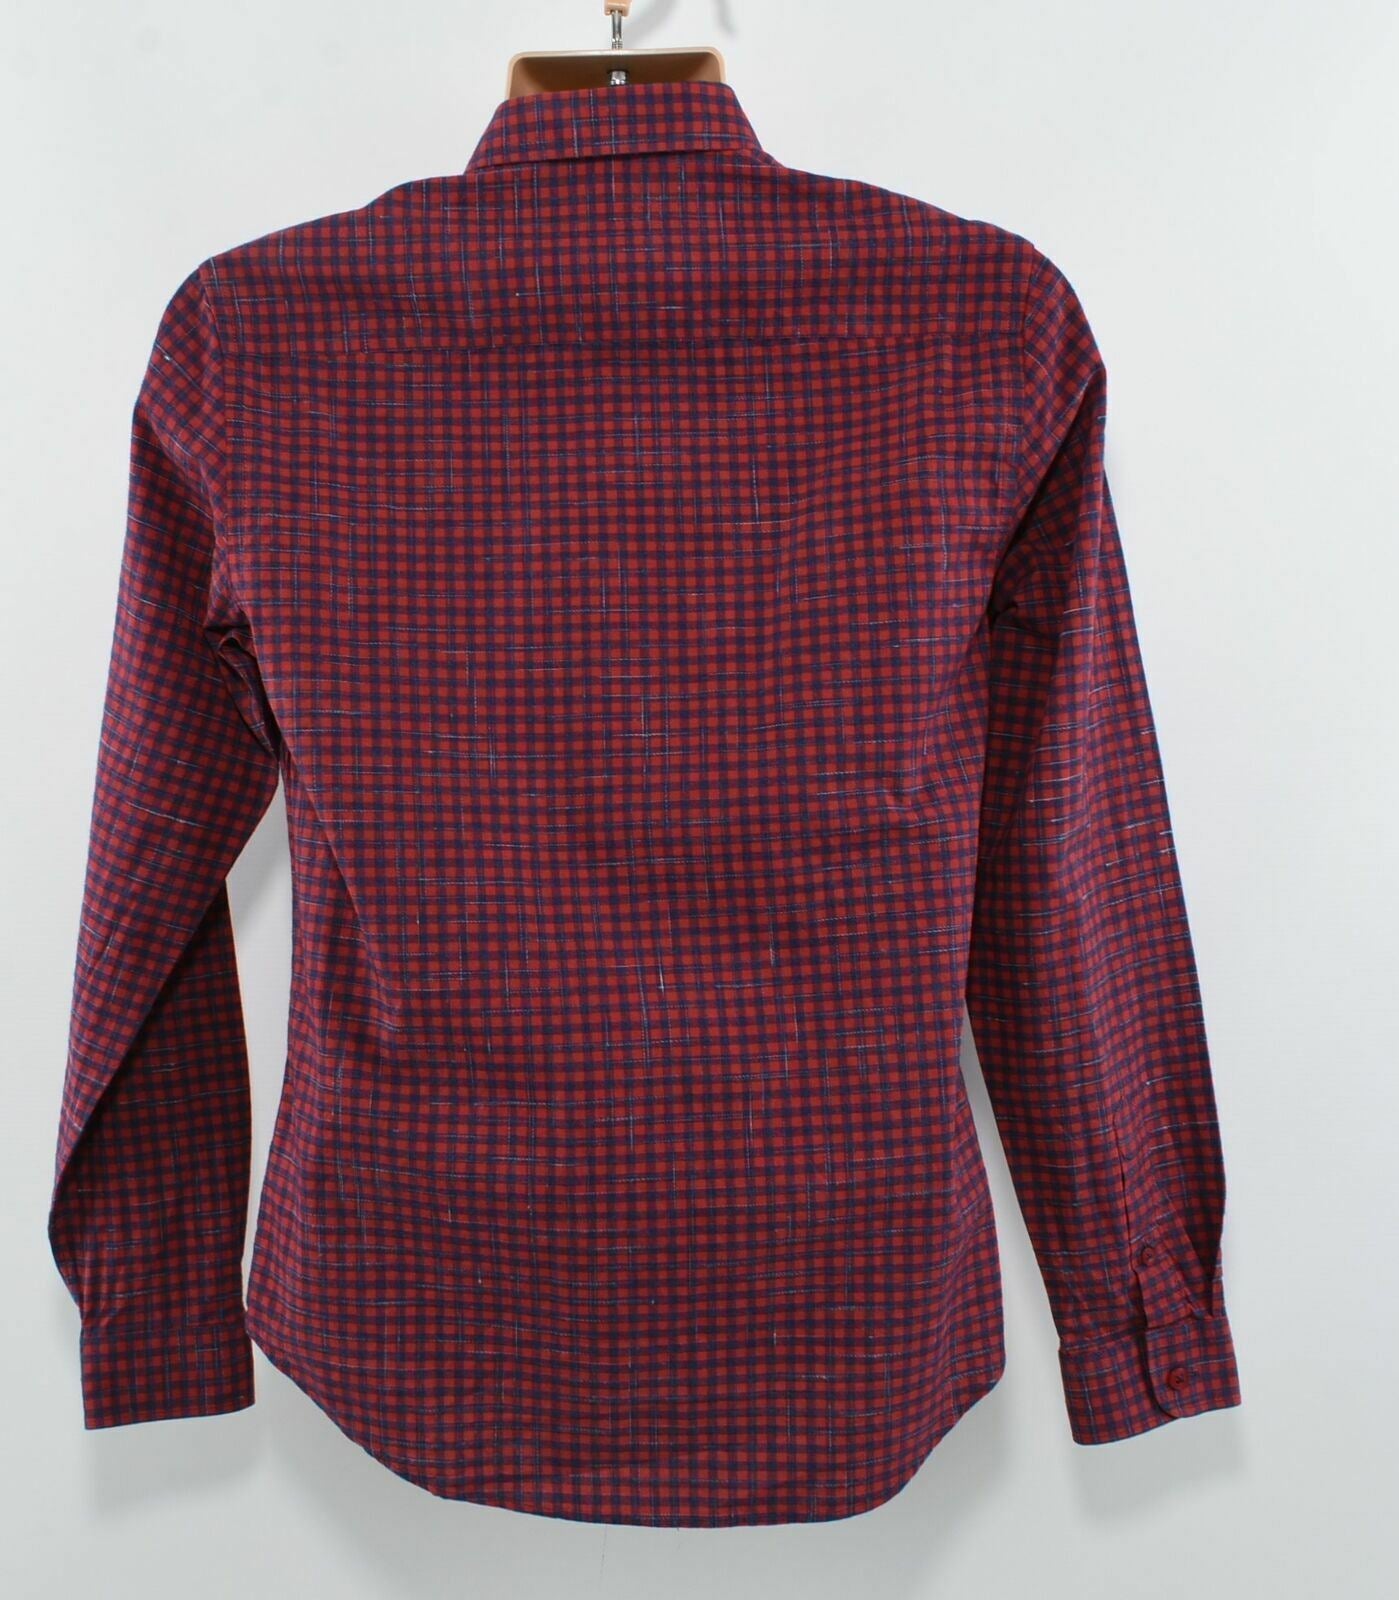 CARVEN Women's Checked Long Sleeve Button Down Shirt Size 37 UK 8 to UK 10